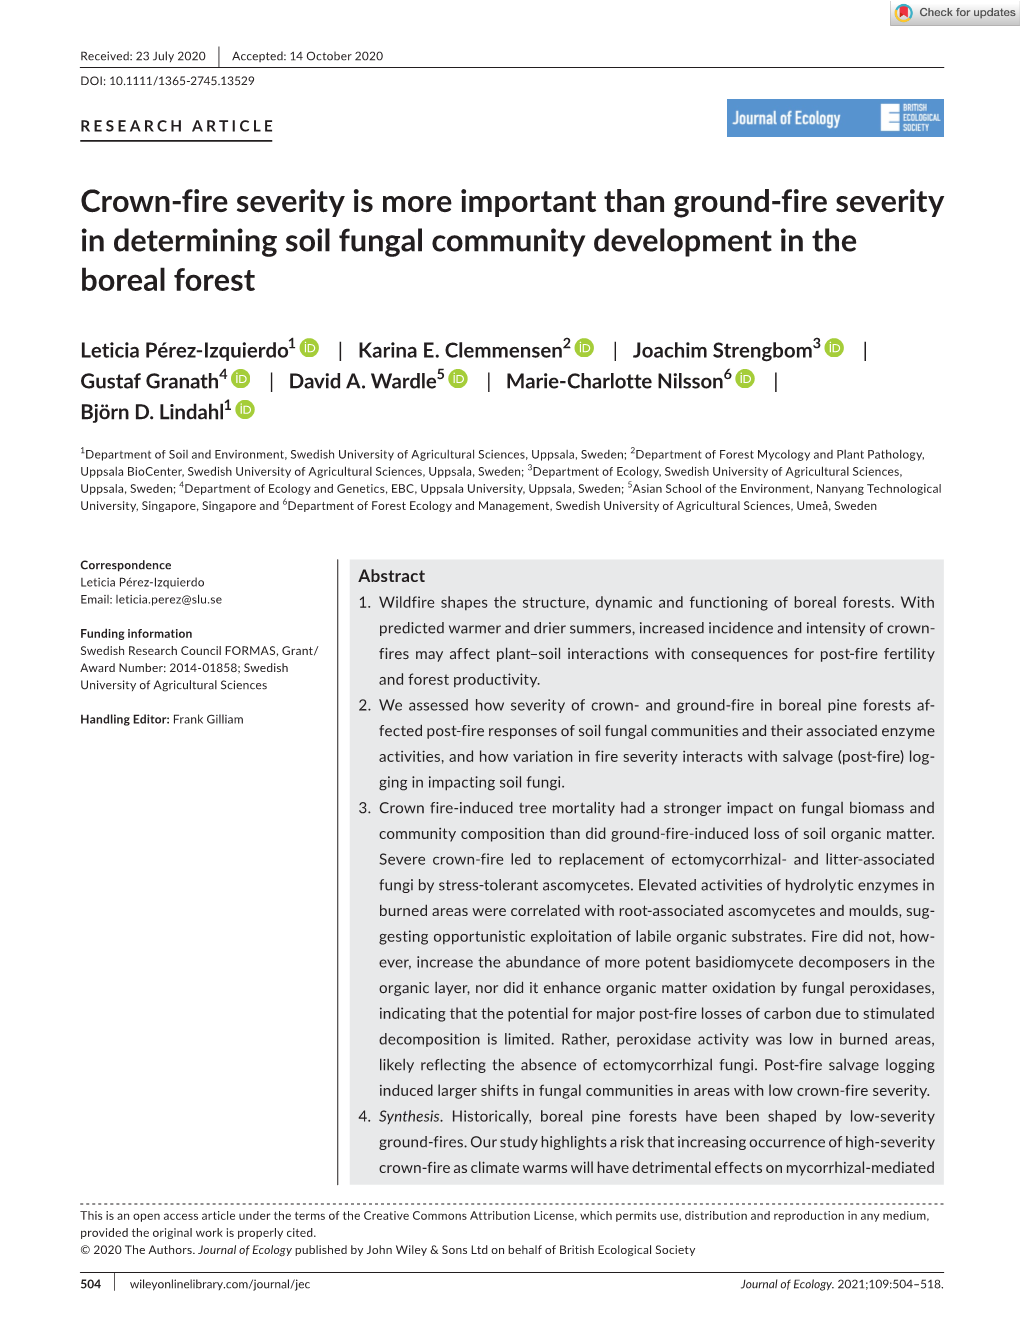 Crown‐Fire Severity Is More Important Than Ground‐Fire Severity in Determining Soil Fungal Community Development in the Bore